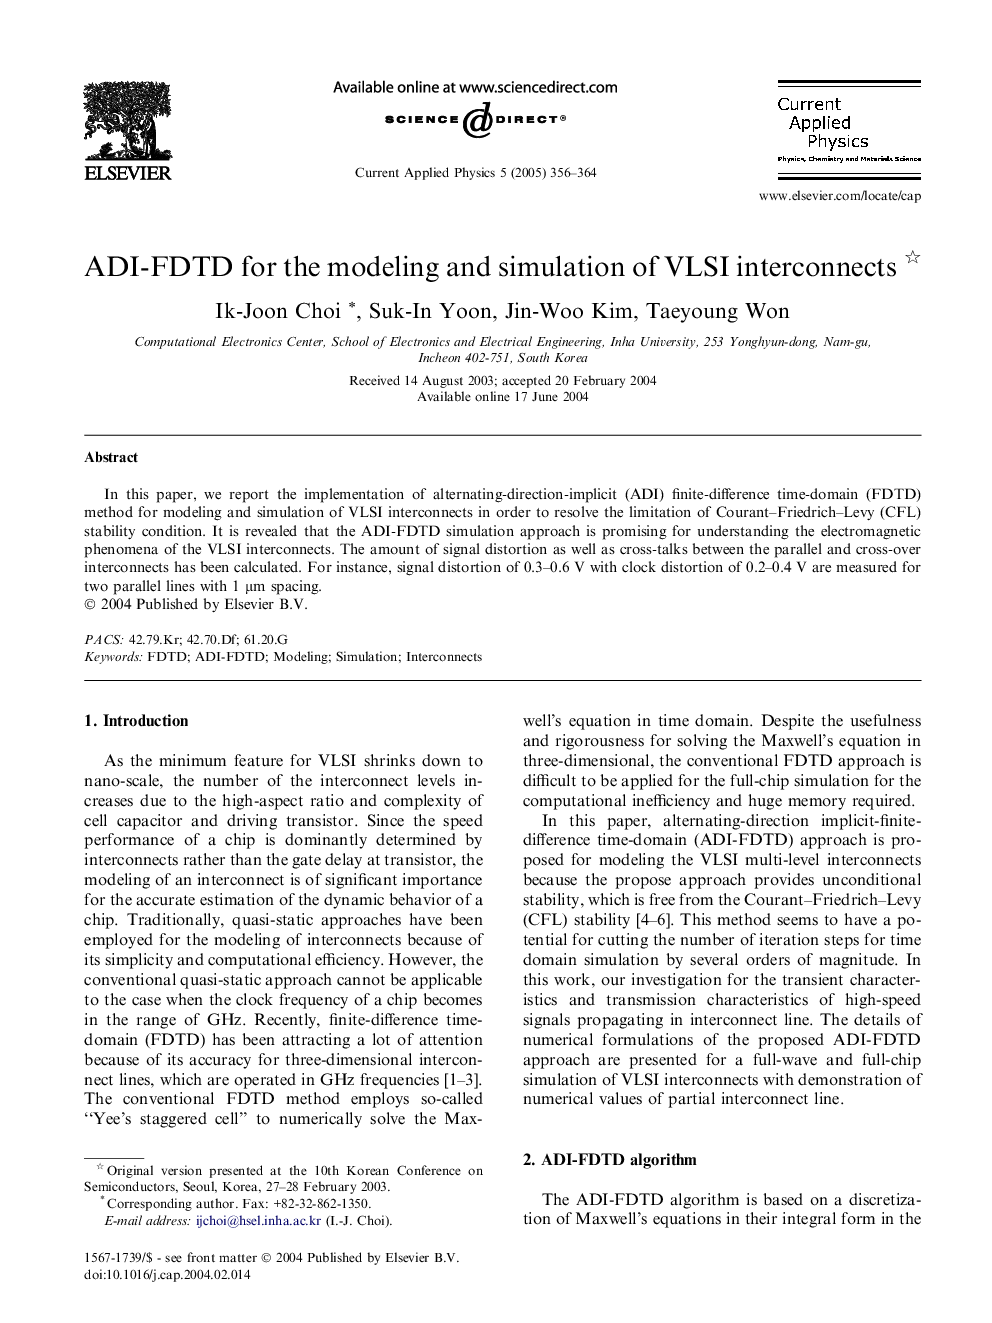 ADI-FDTD for the modeling and simulation of VLSI interconnects